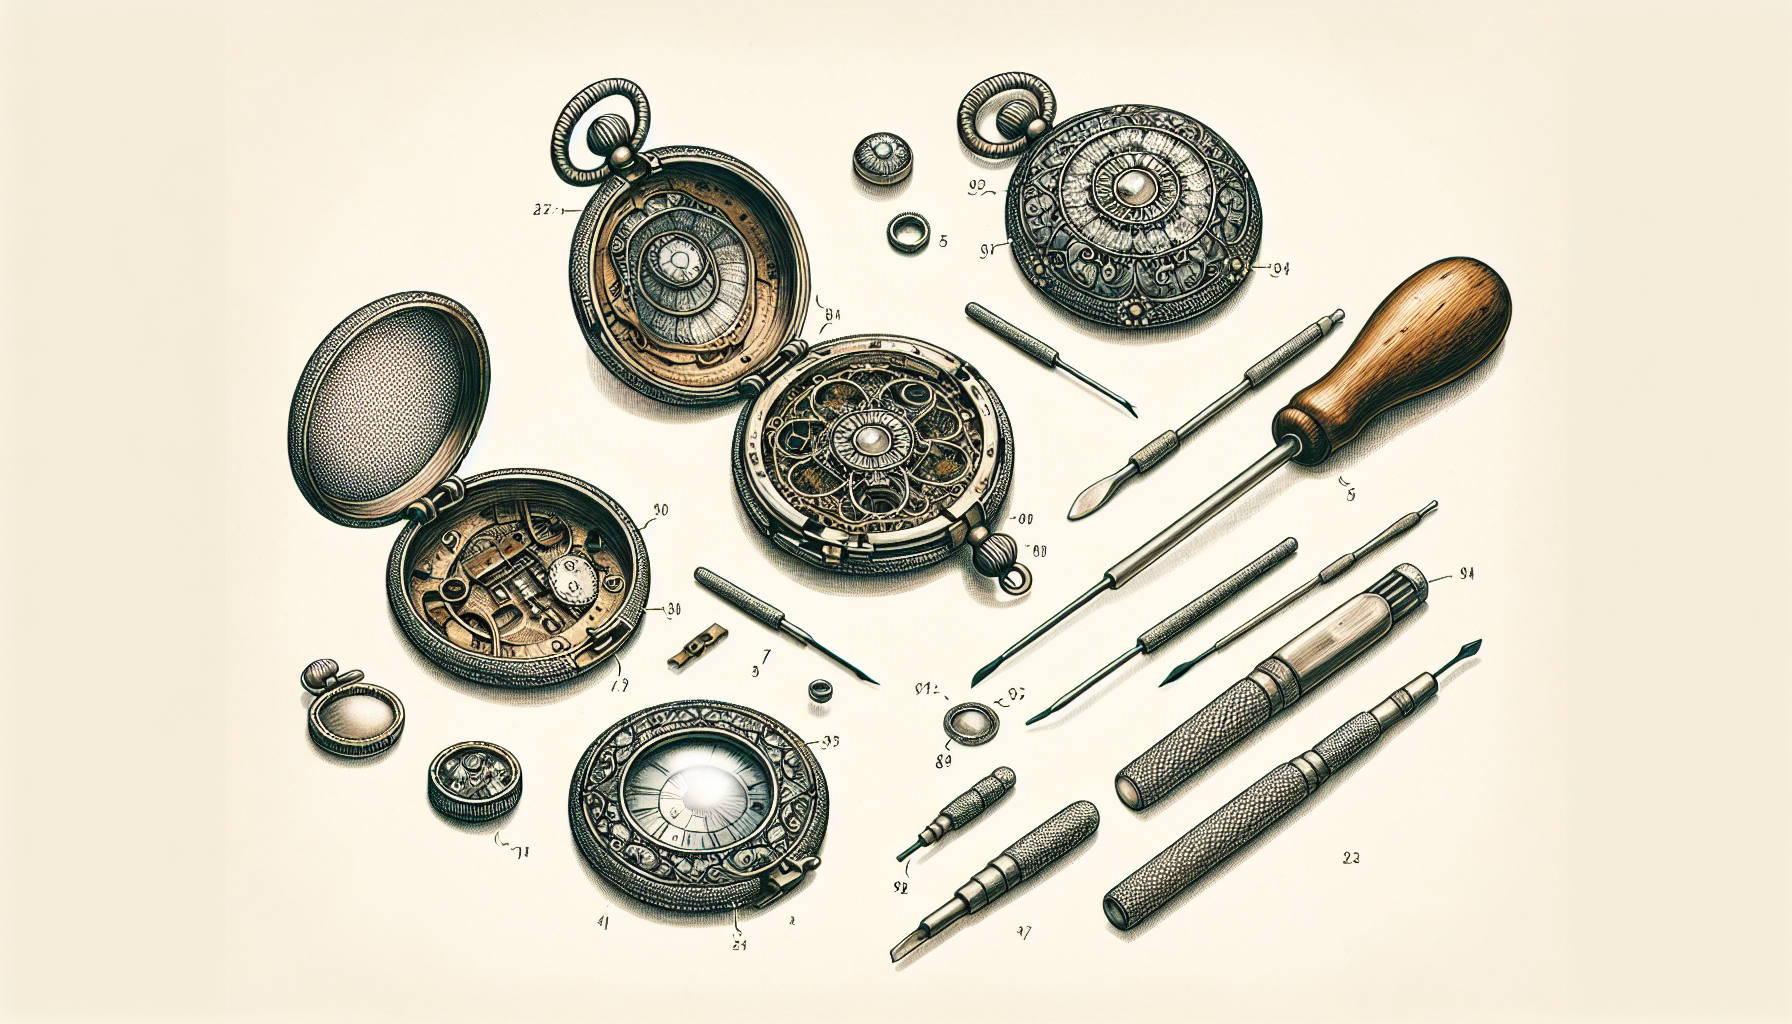 A detailed visual guide of repairing a locket. The first image shows the broken locket, perhaps a vintage piece with intricate metallic details. The second image presents the required tools: small scr